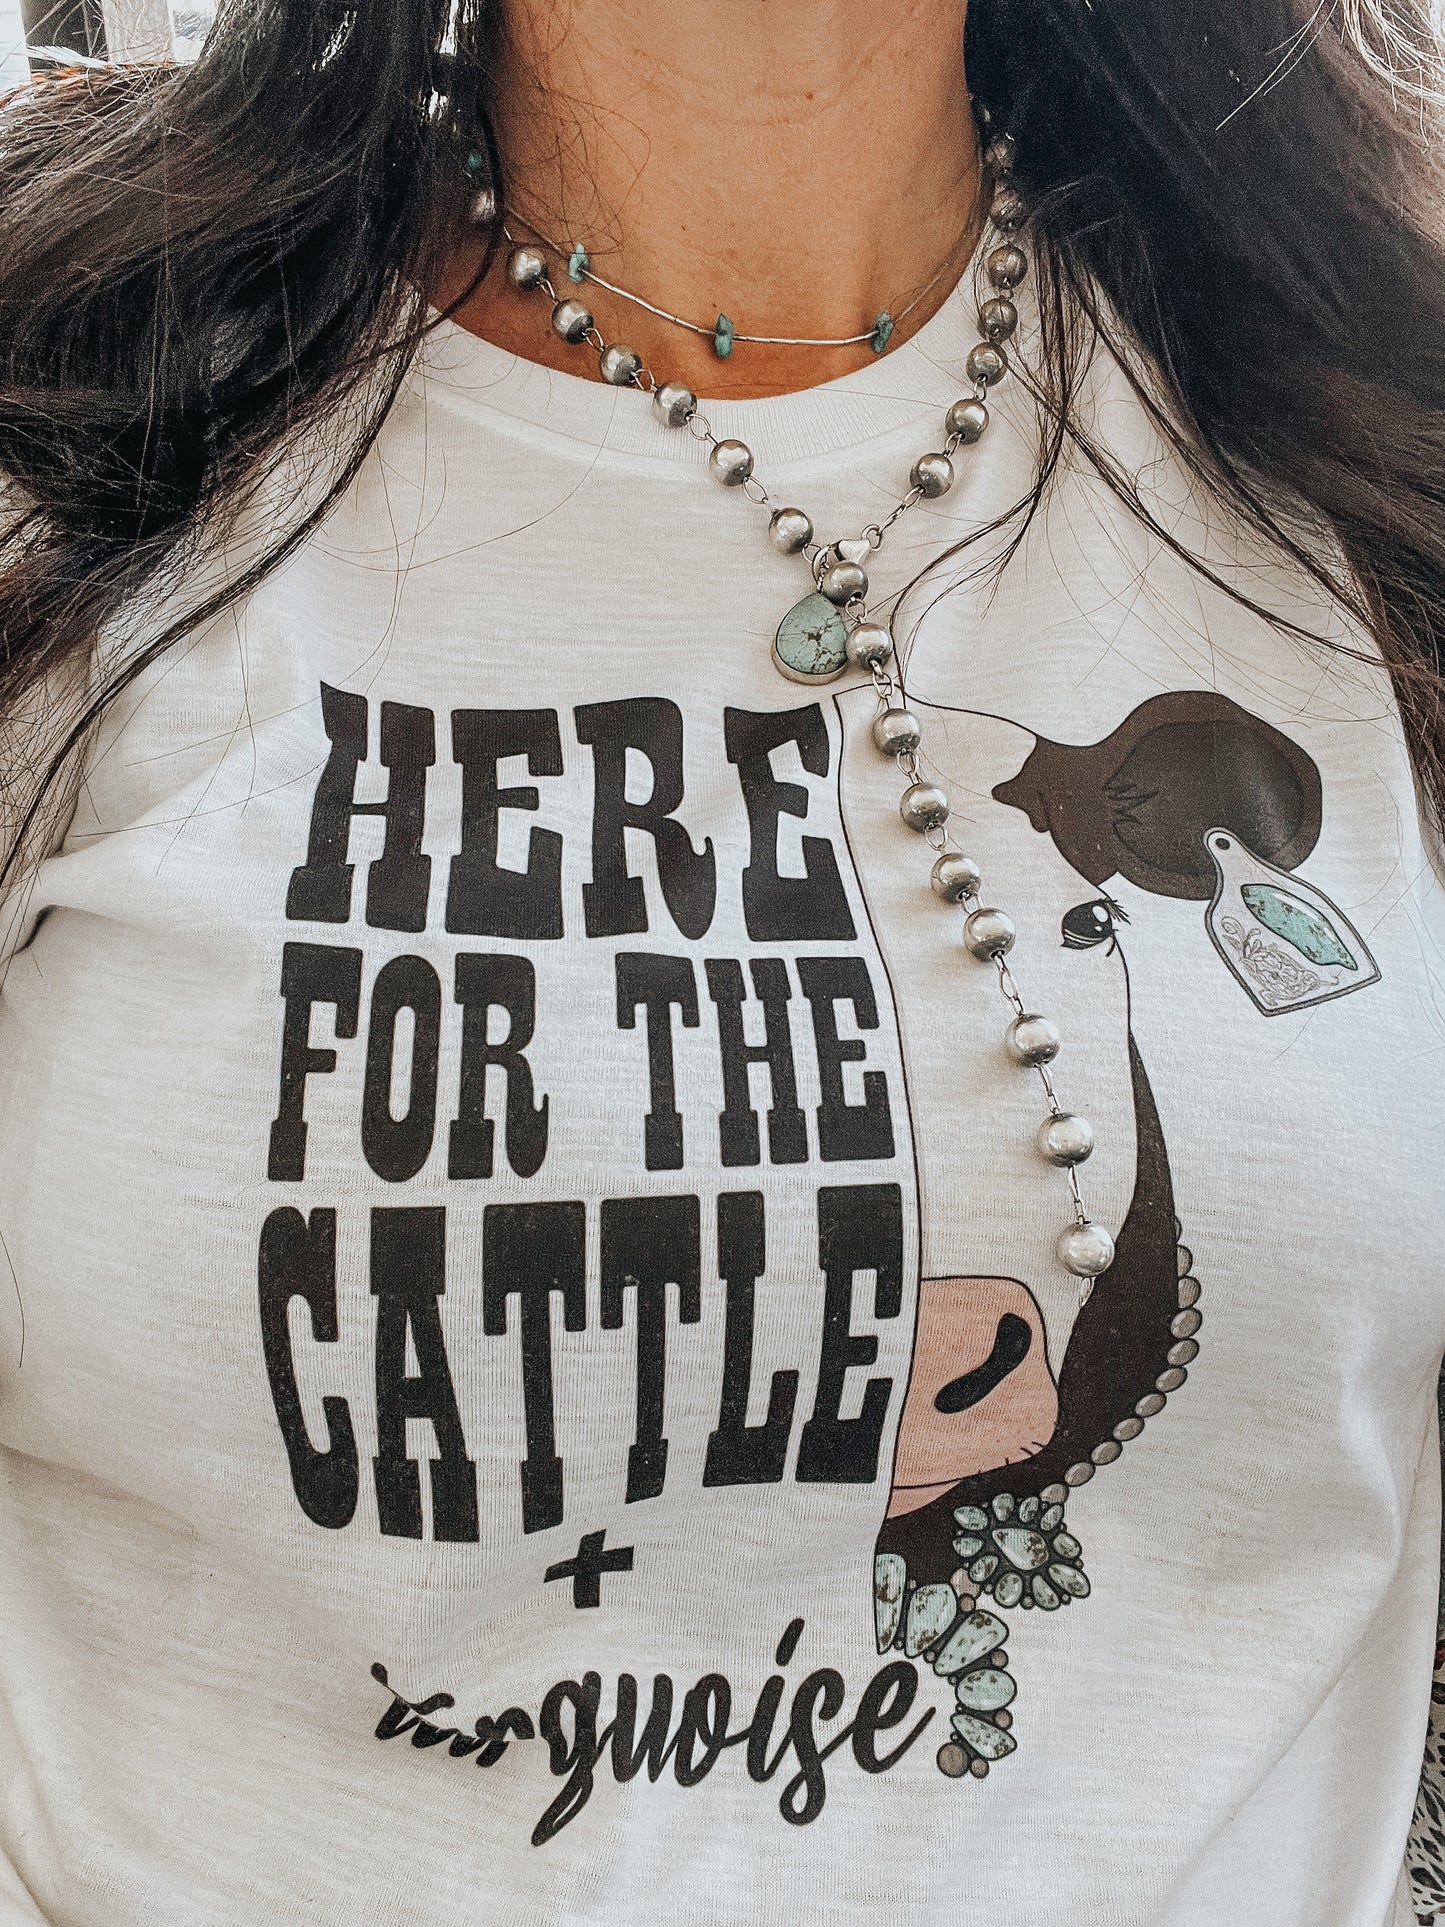 the Here for the Cattle + |Turquoise| littles